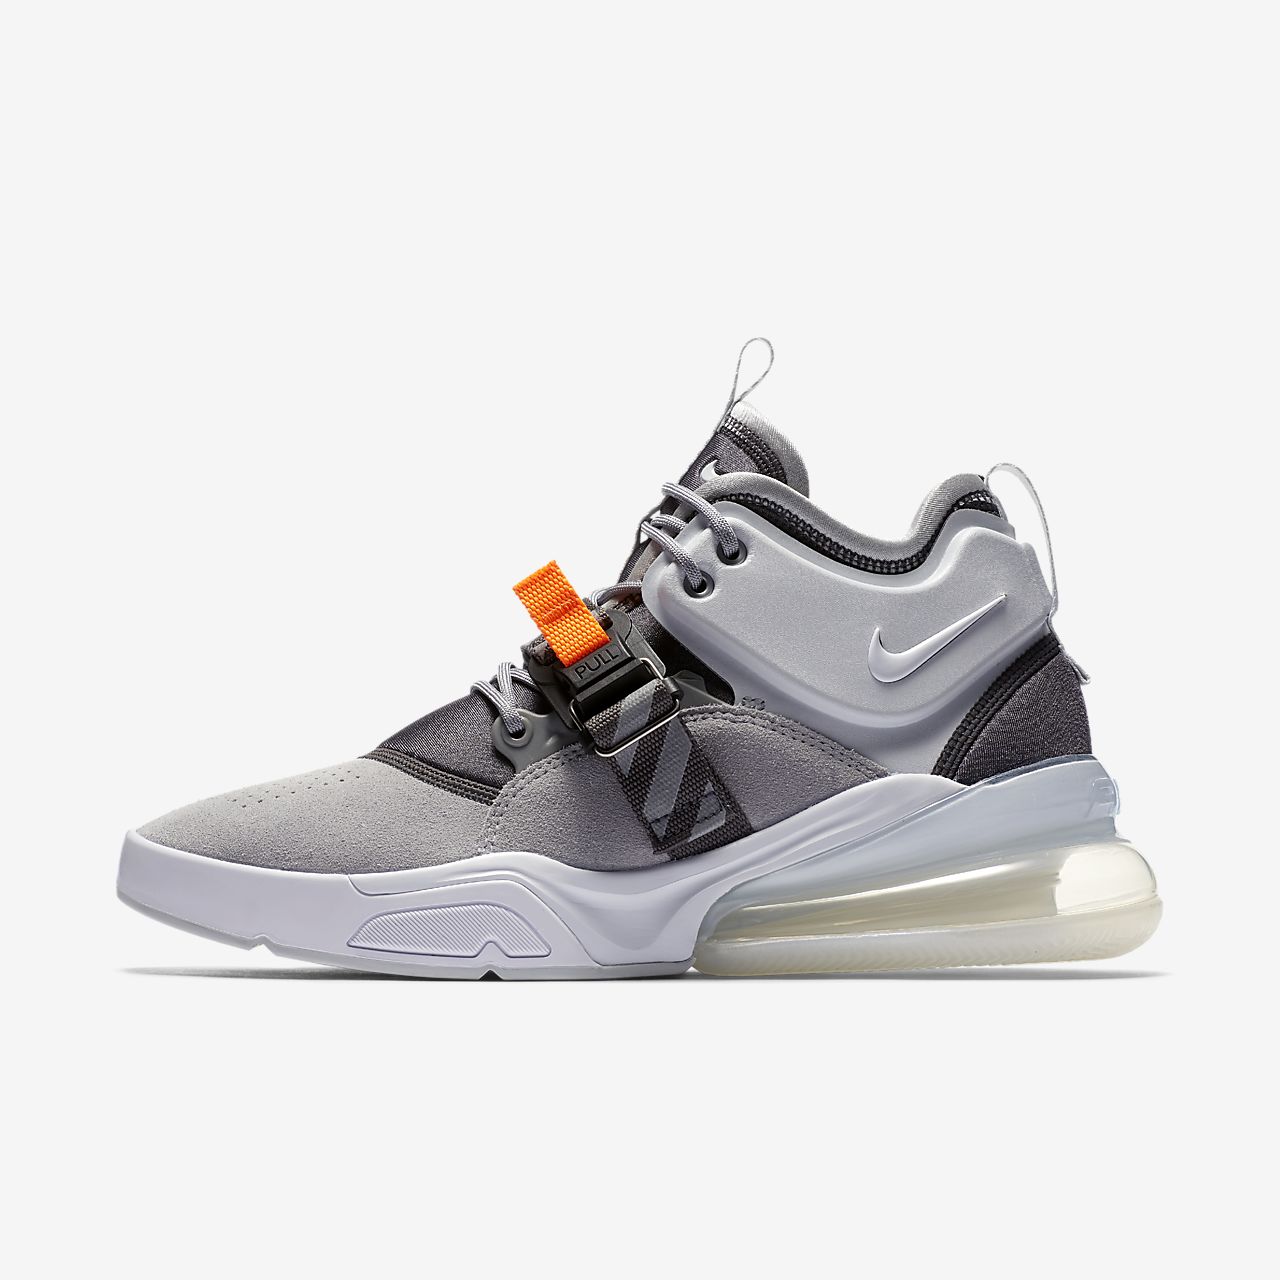 nike air force 270 chile Nike online – Compra productos Nike baratos